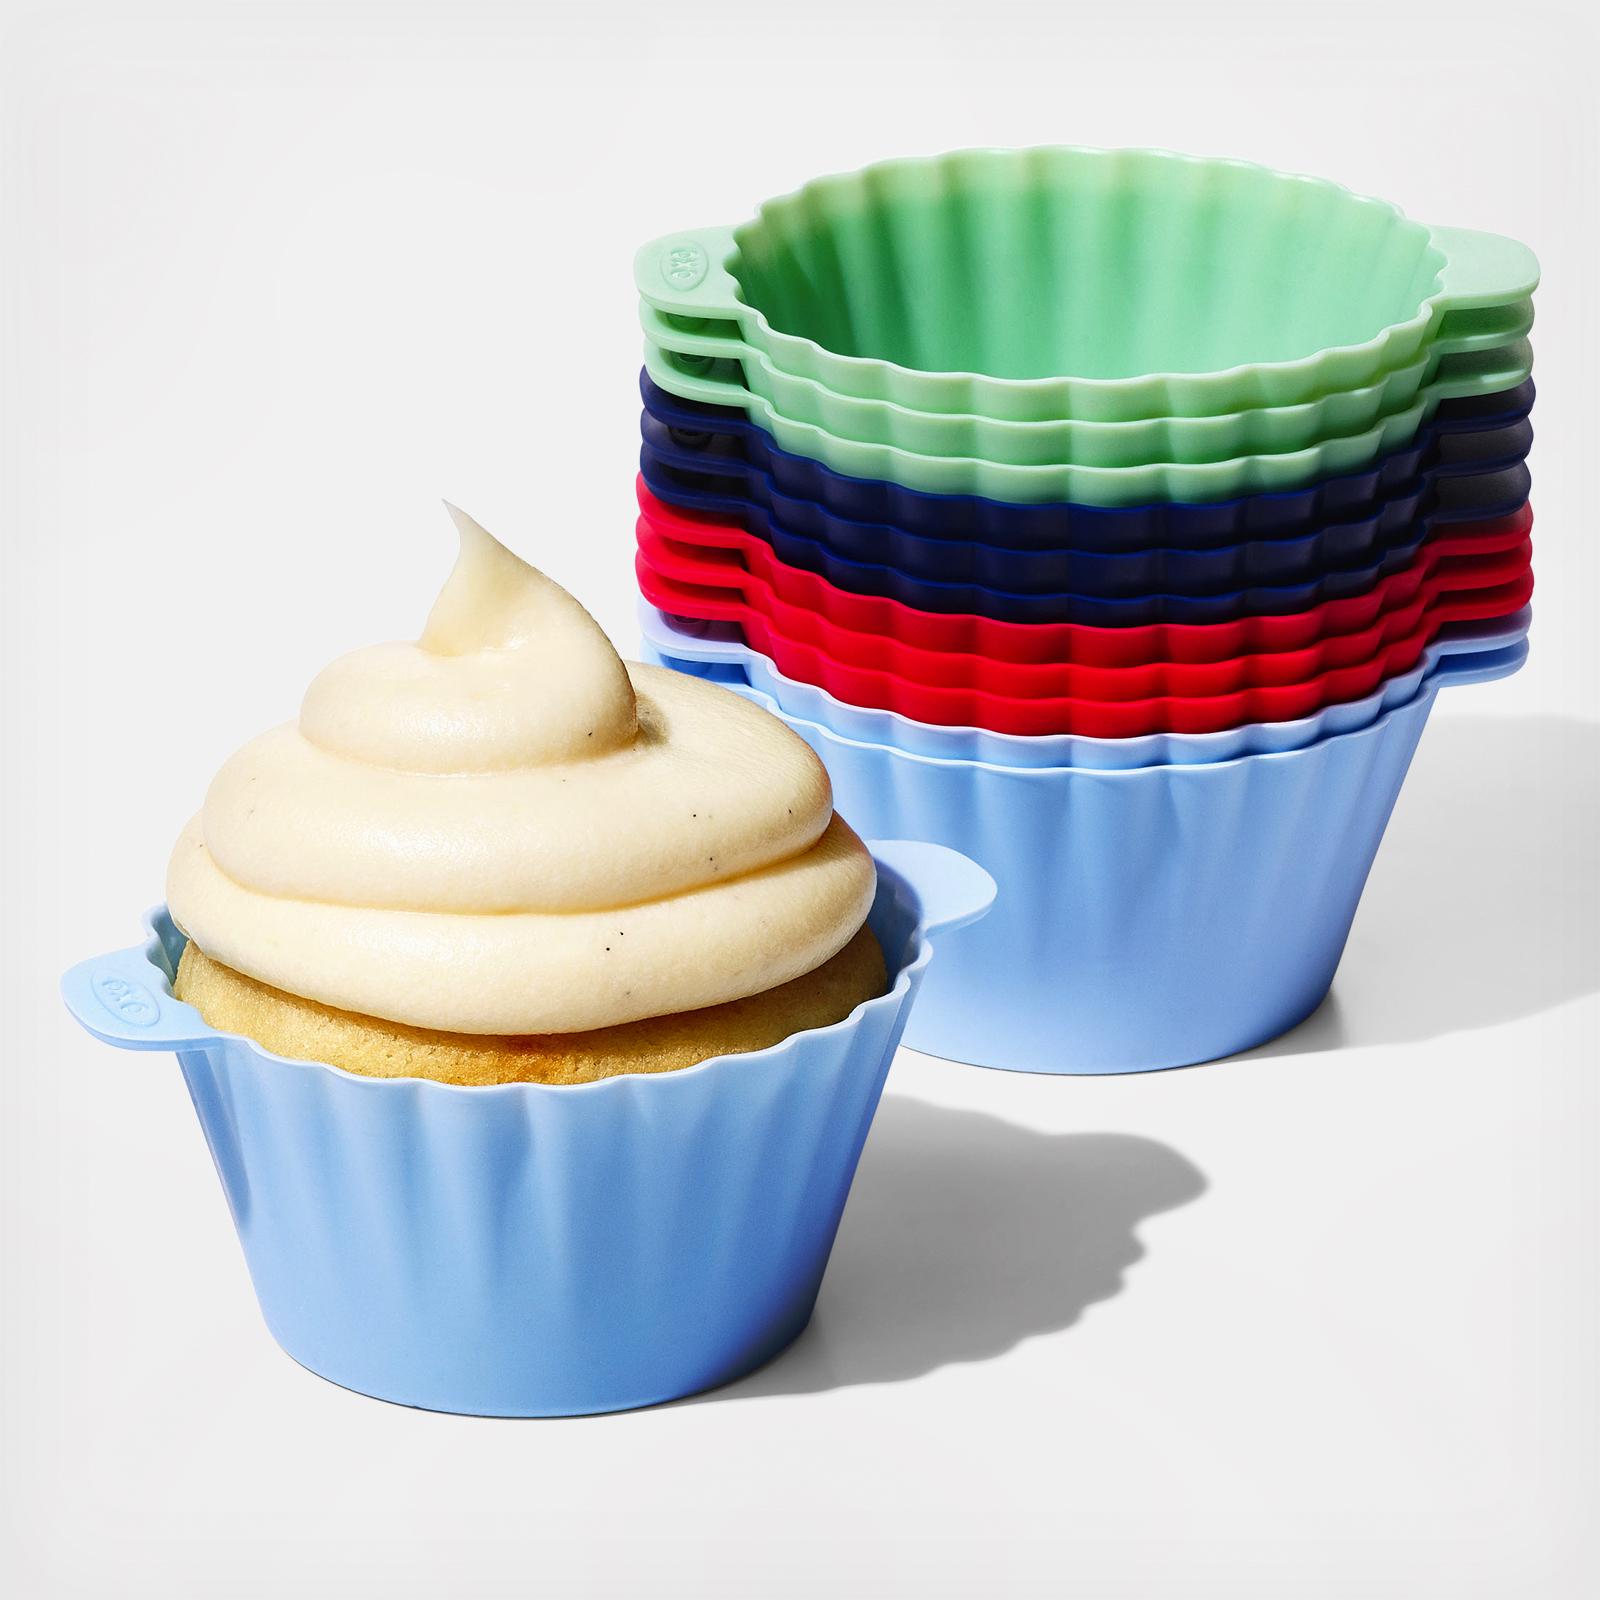 Bento item of the week: Silicone cupcake liners